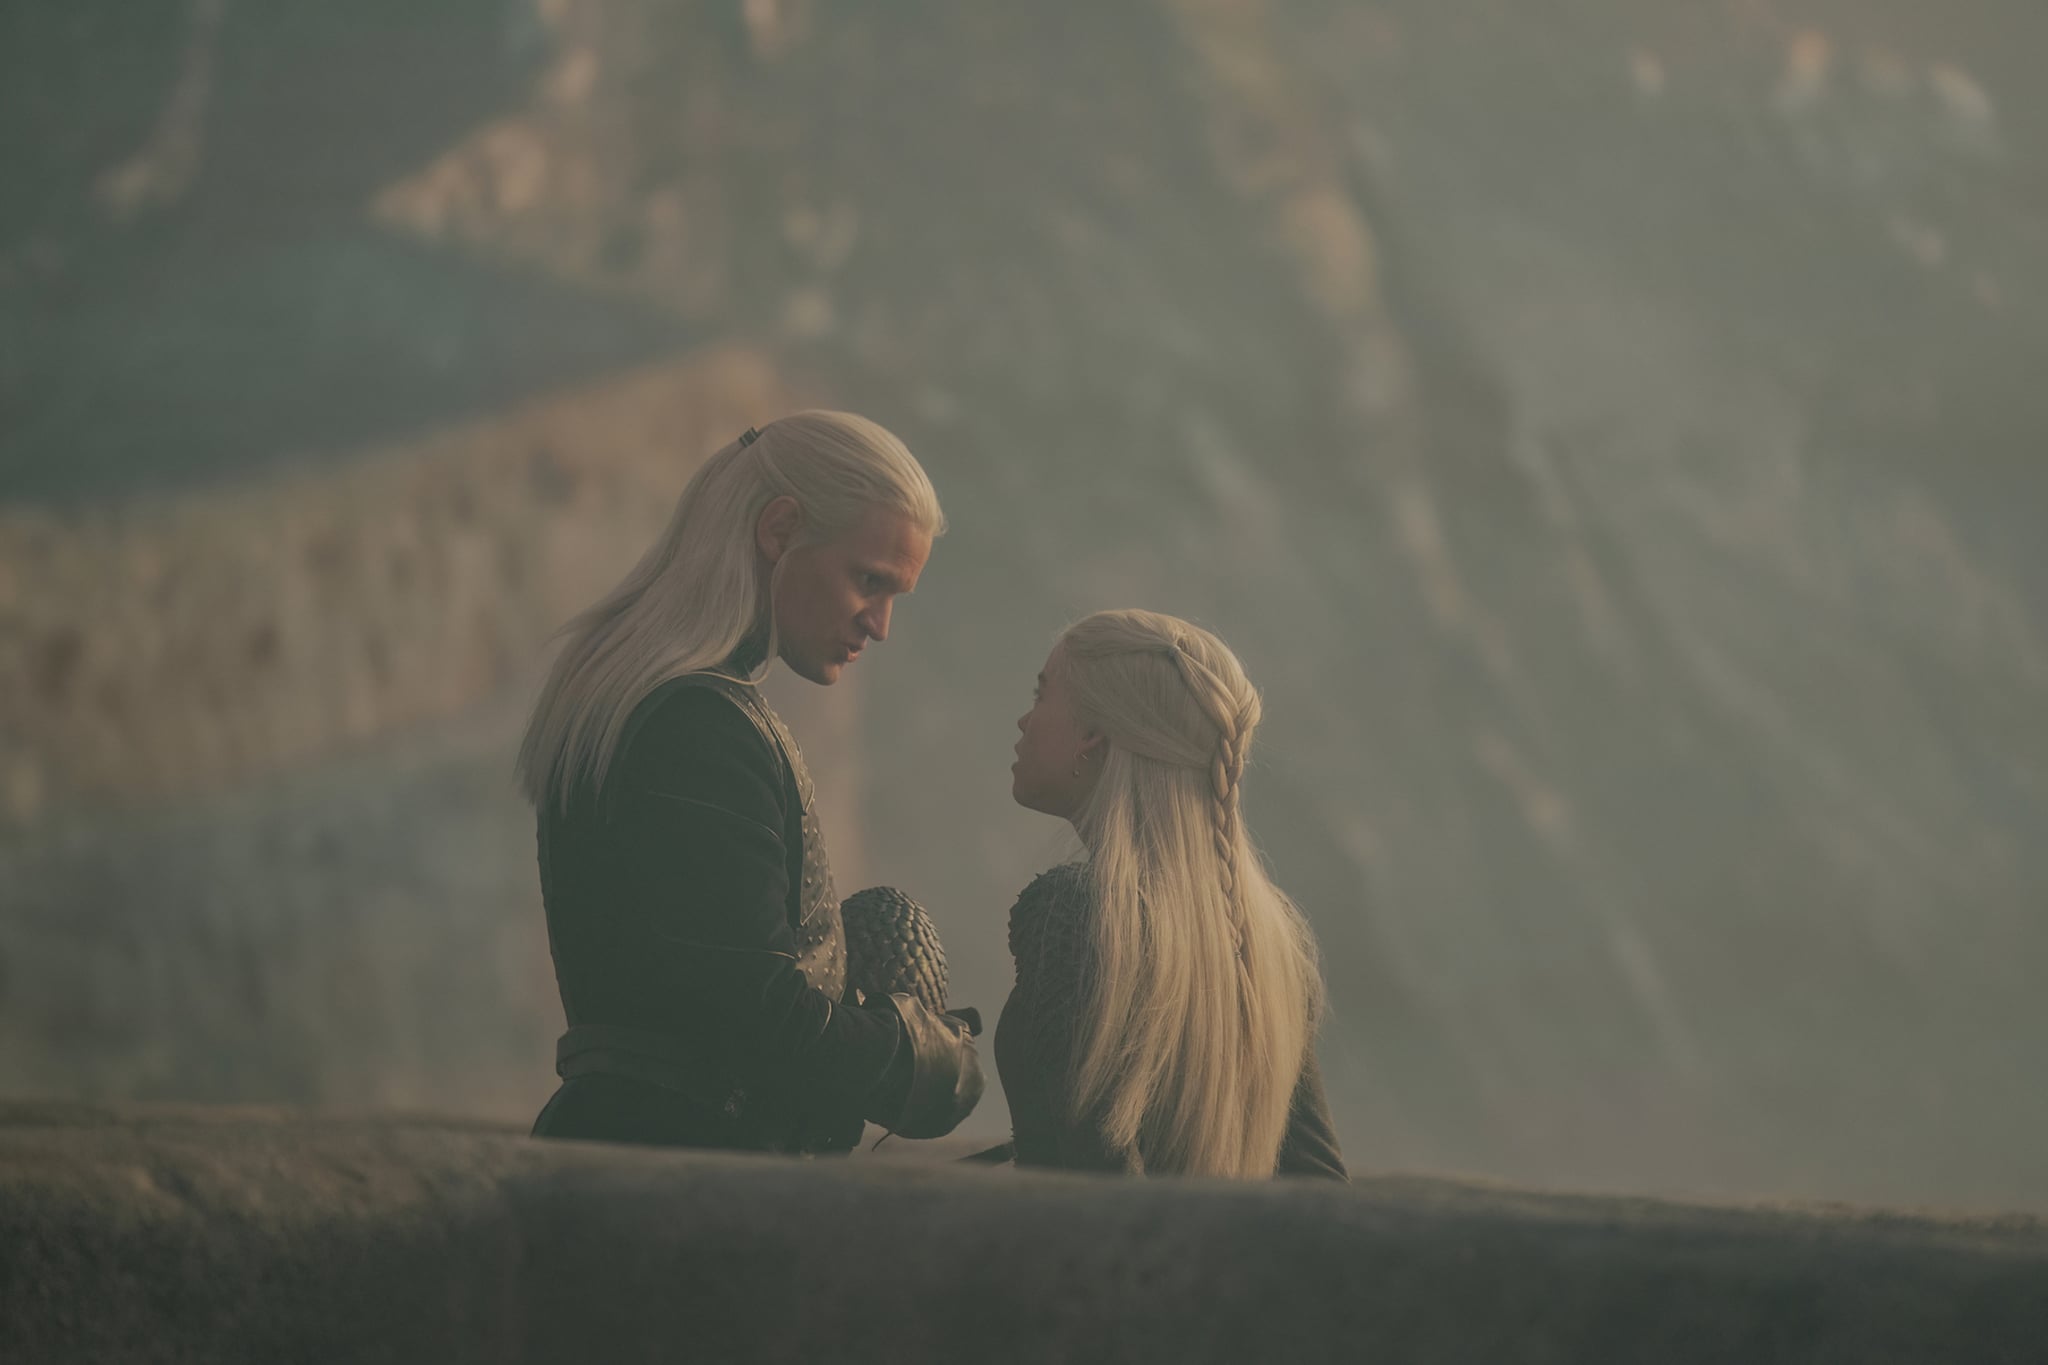 Rhaenyra and Daemon’s Relationship Shapes the Future of Westeros, According to the Books